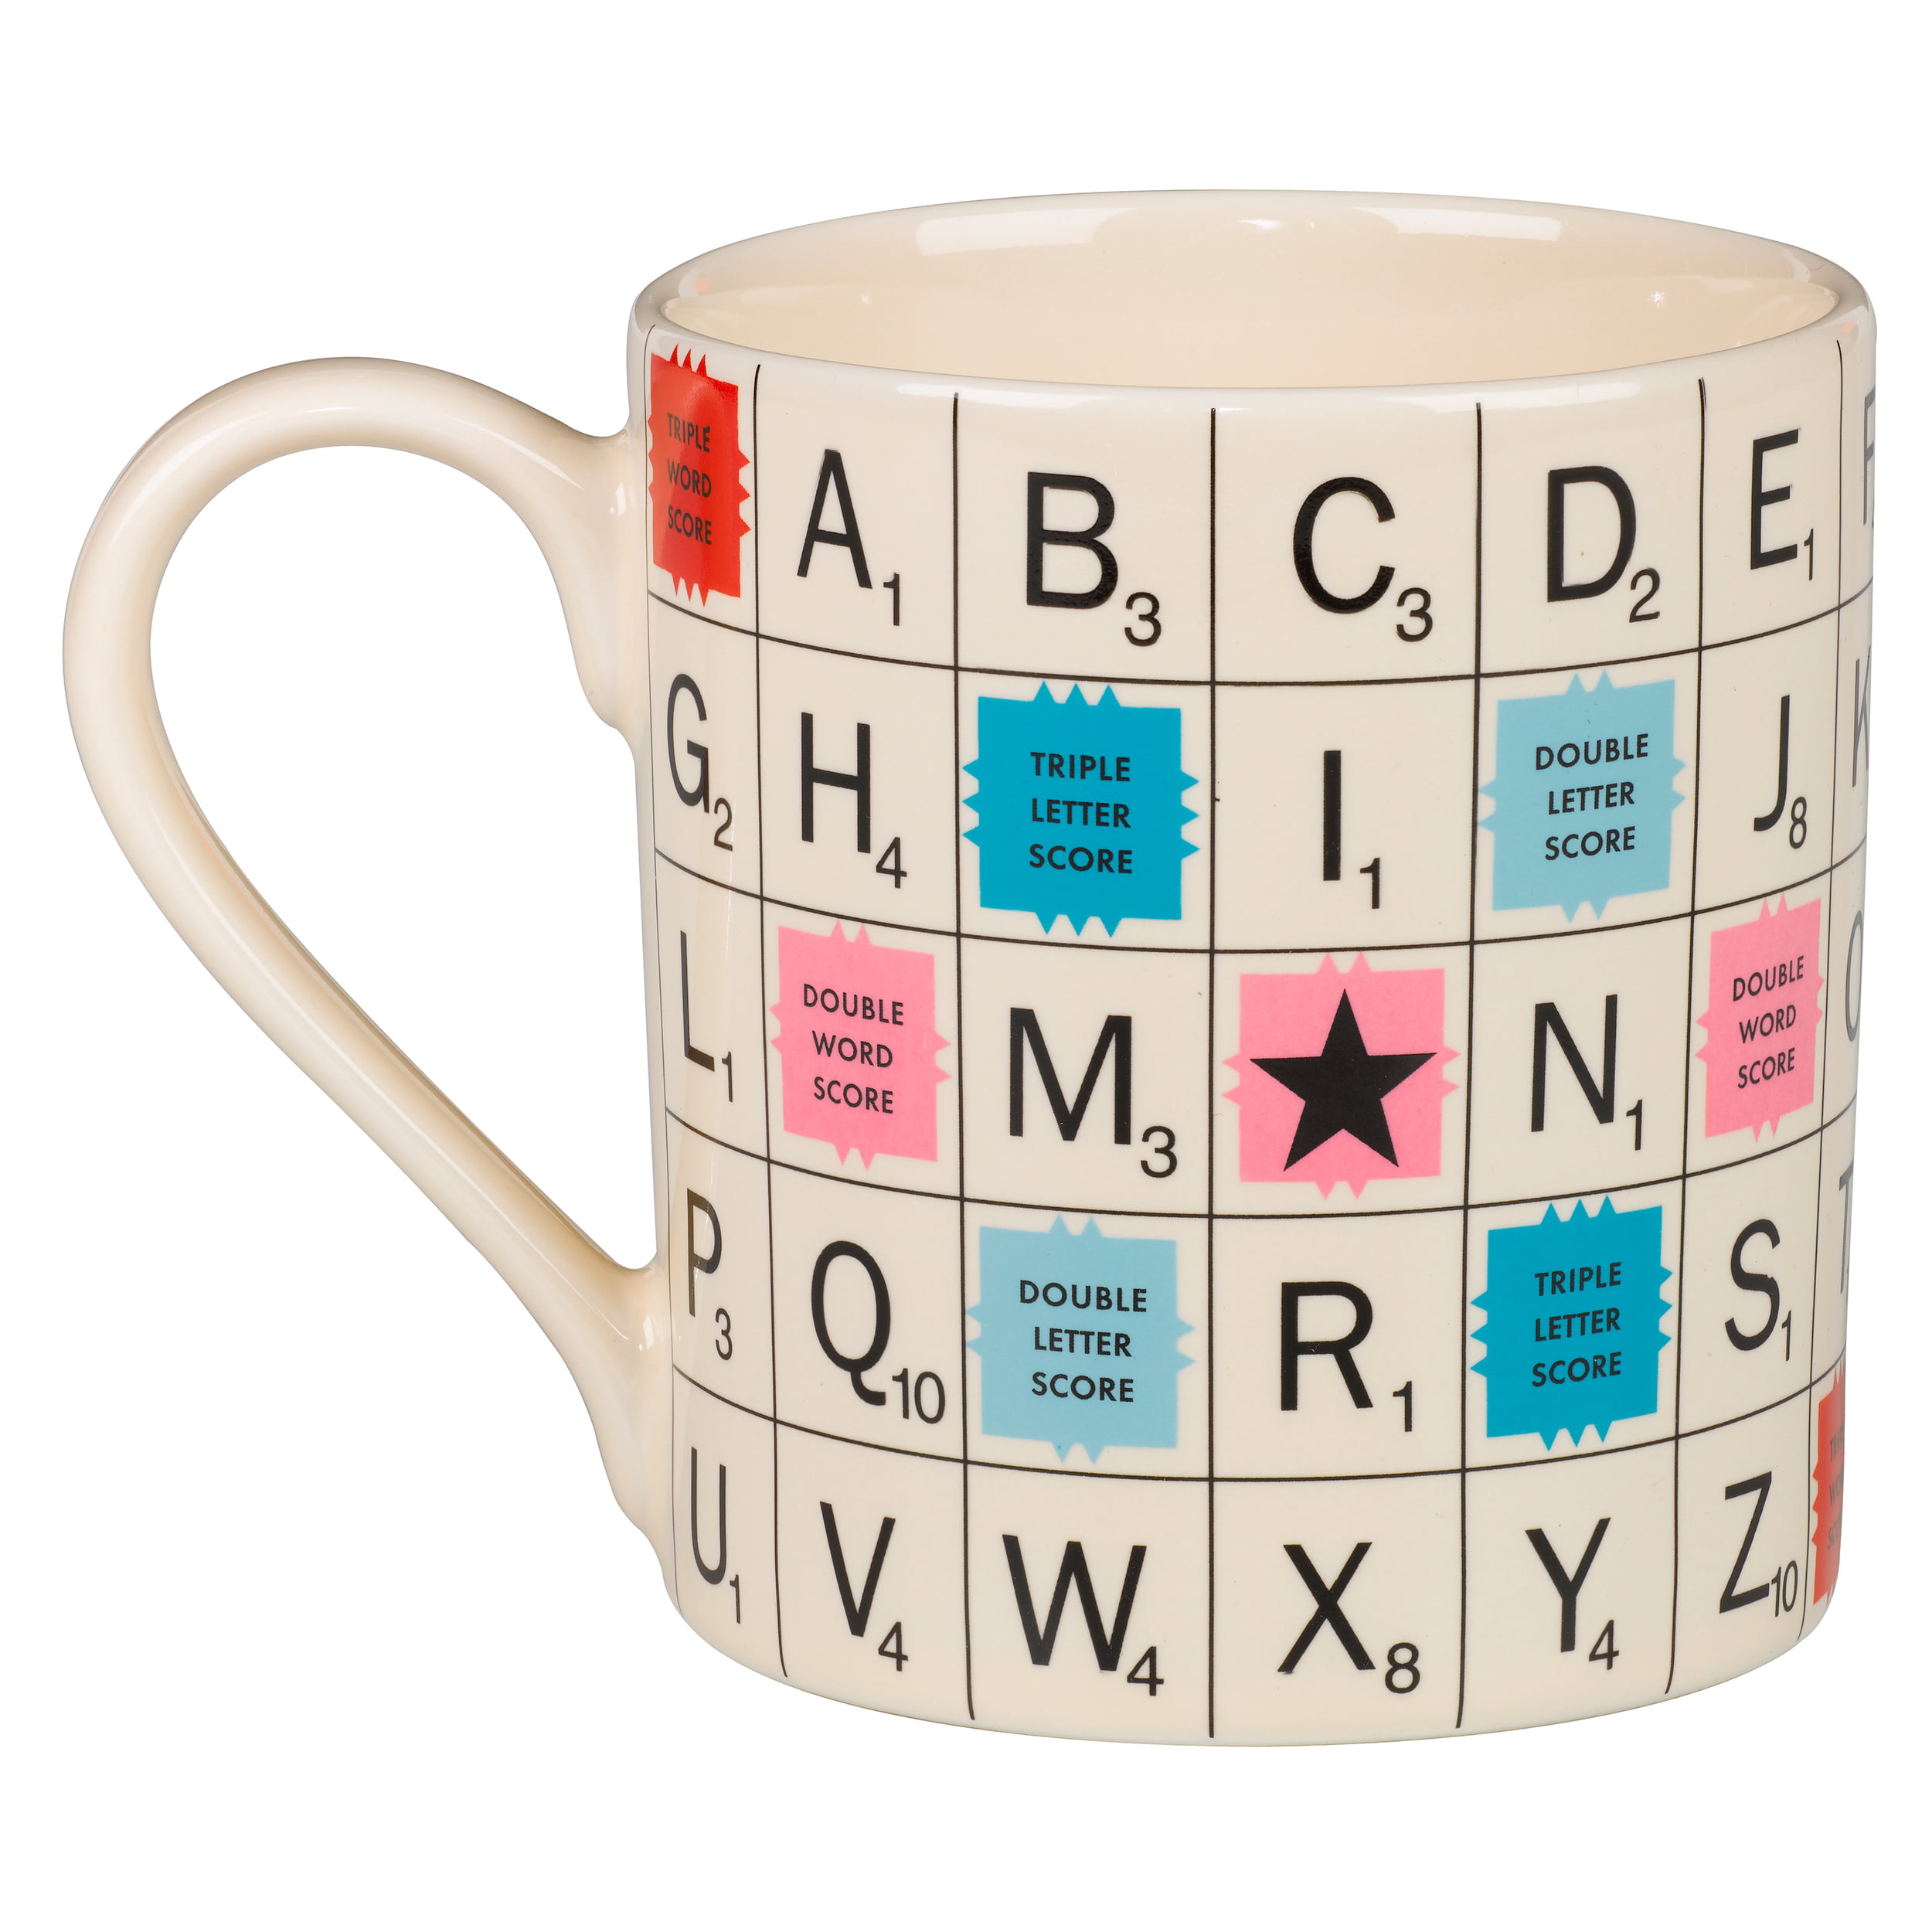 Choose any letter Q e.g Personalised Scrabble Letters Mug Cup 